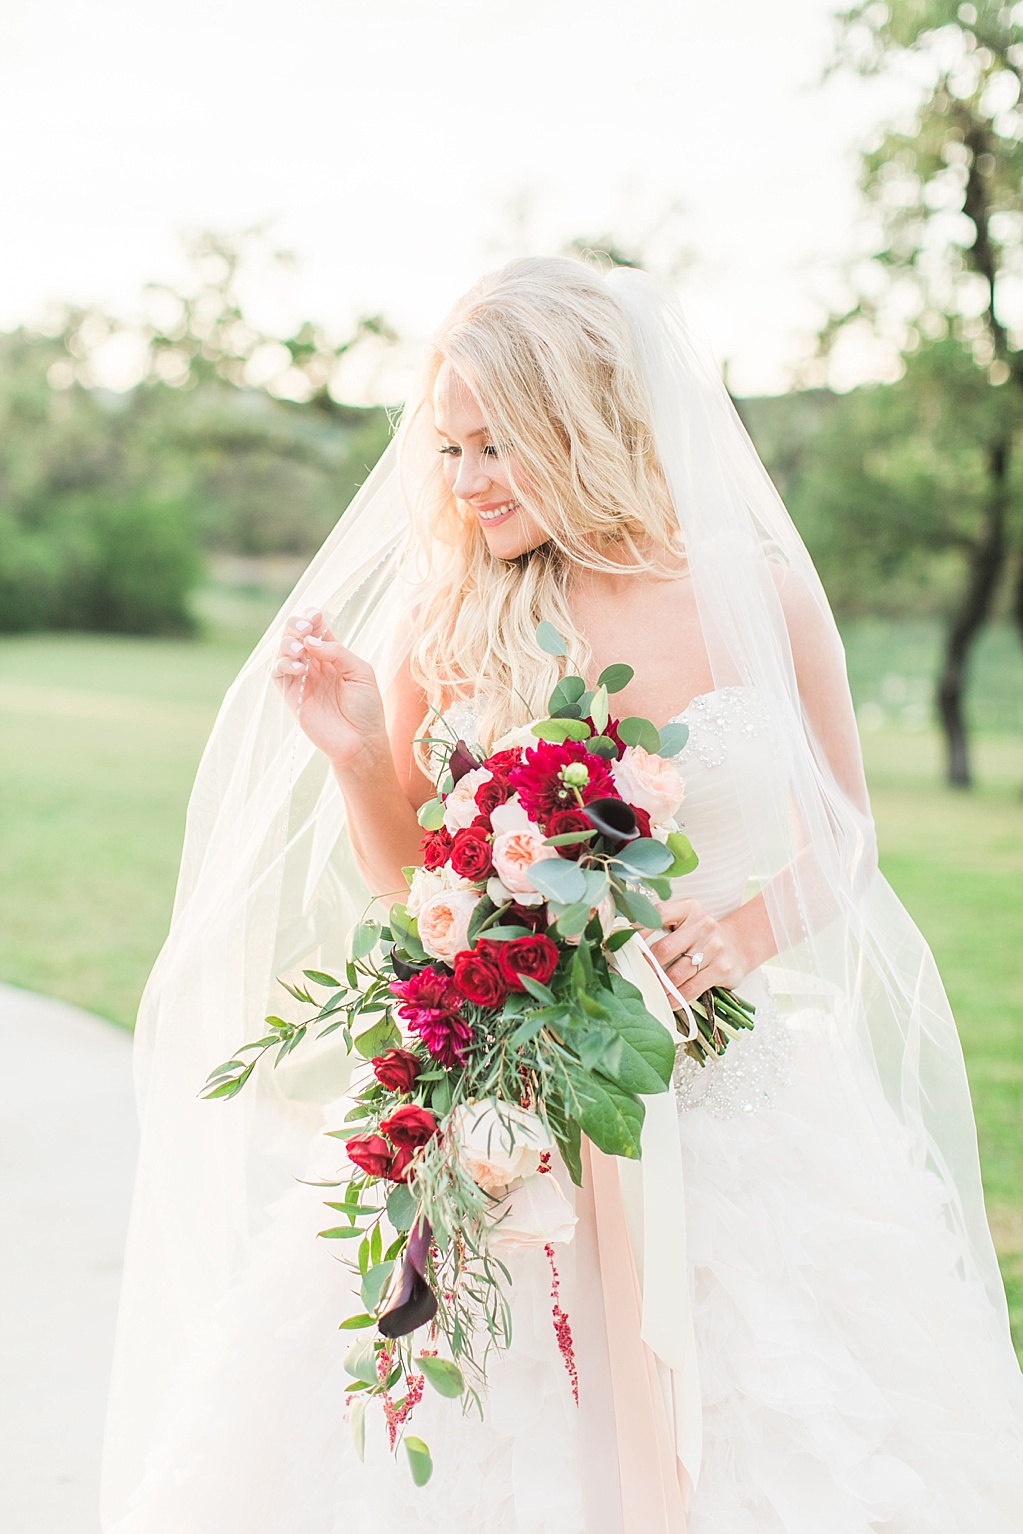 A Classic Bridal Session at Turtle Creek Olive Grove Wedding Venue in Kerrville, Texas 0023